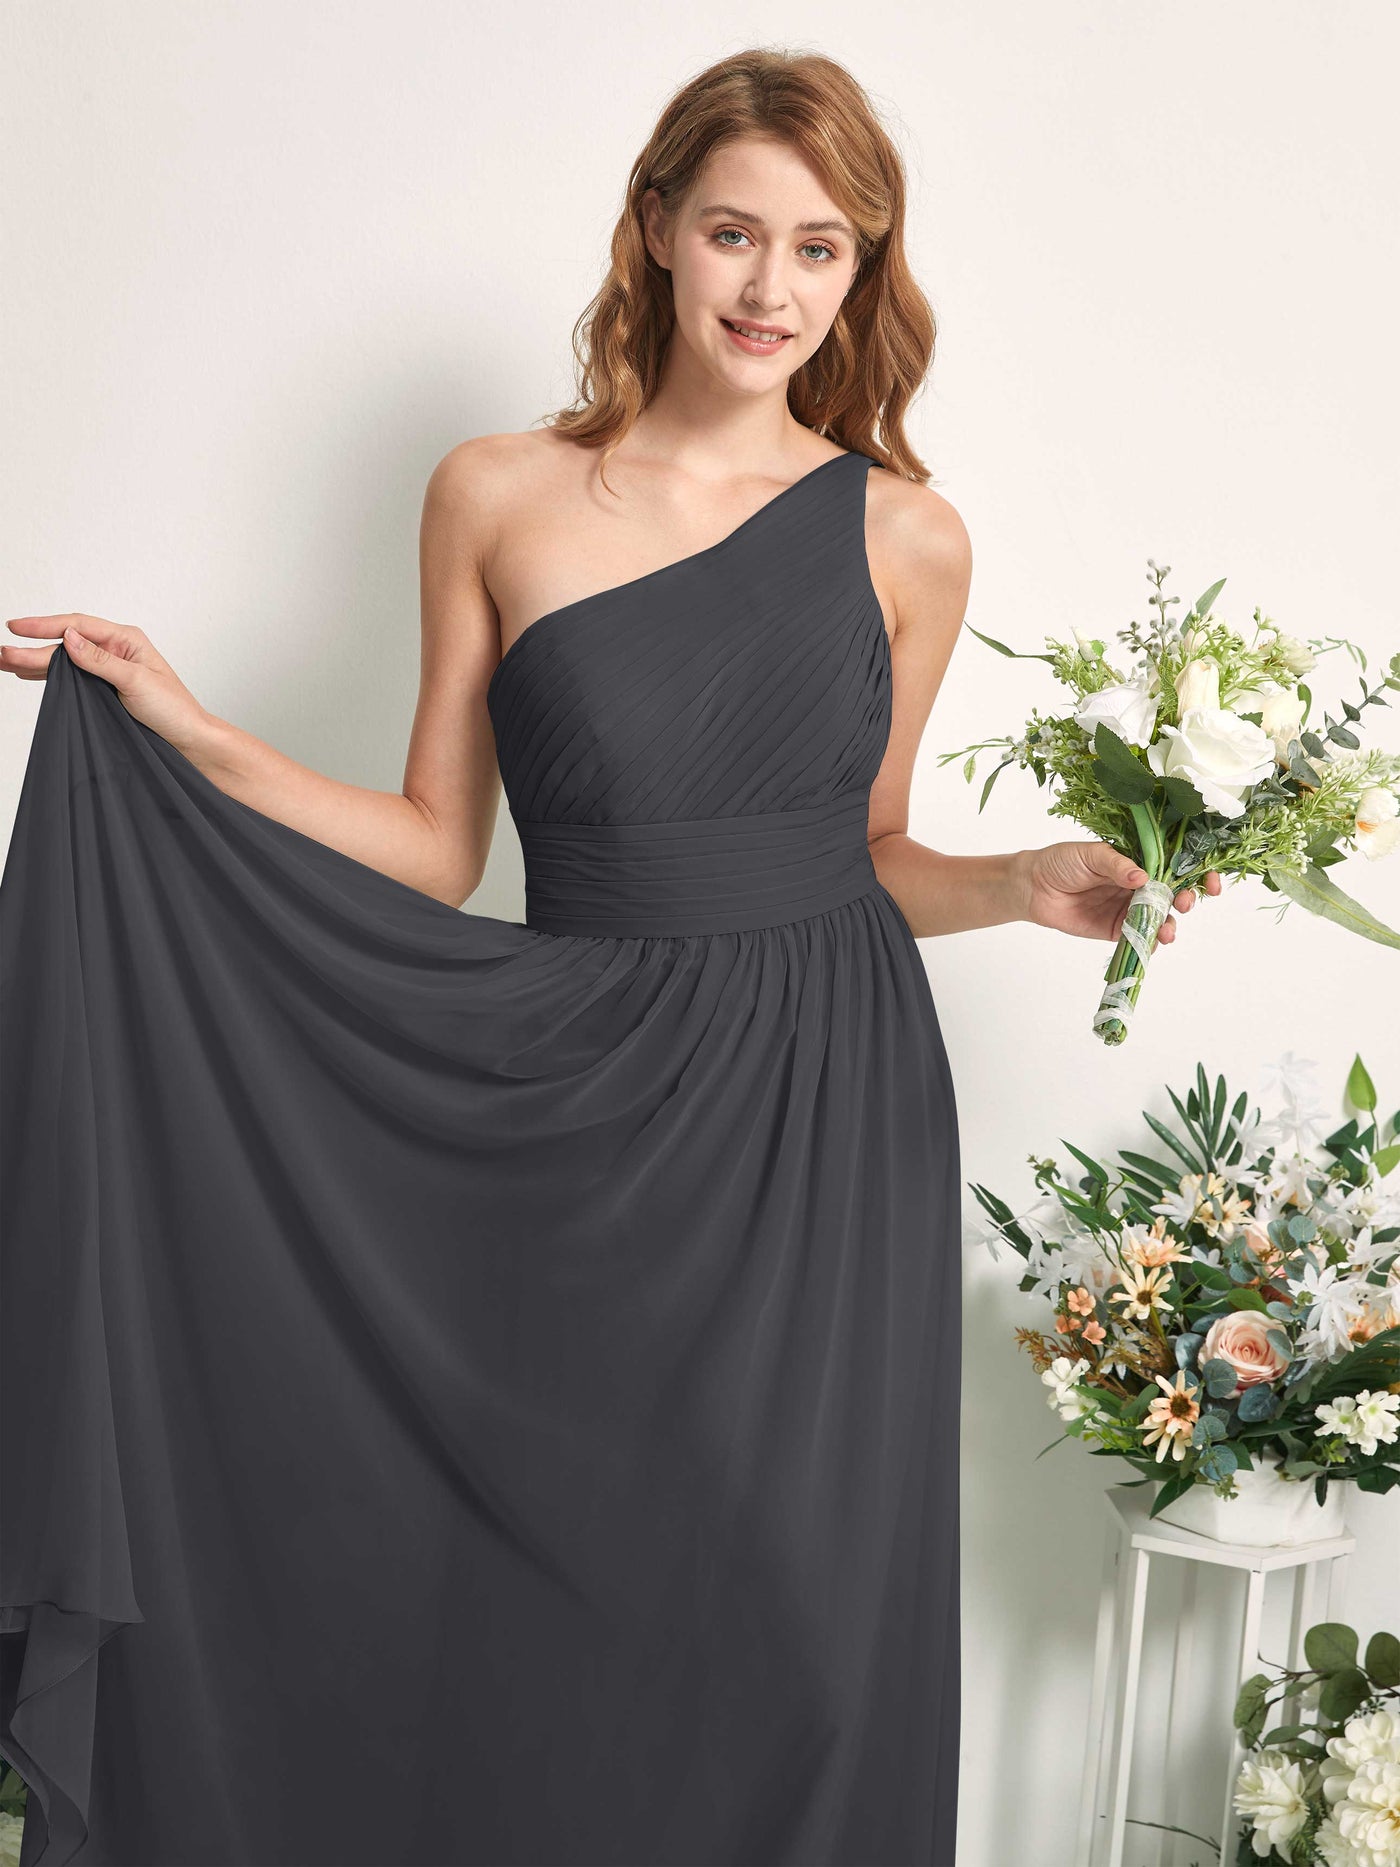 Bridesmaid Dress A-line Chiffon One Shoulder Full Length Sleeveless Wedding Party Dress - Pewter (81226738)#color_pewter